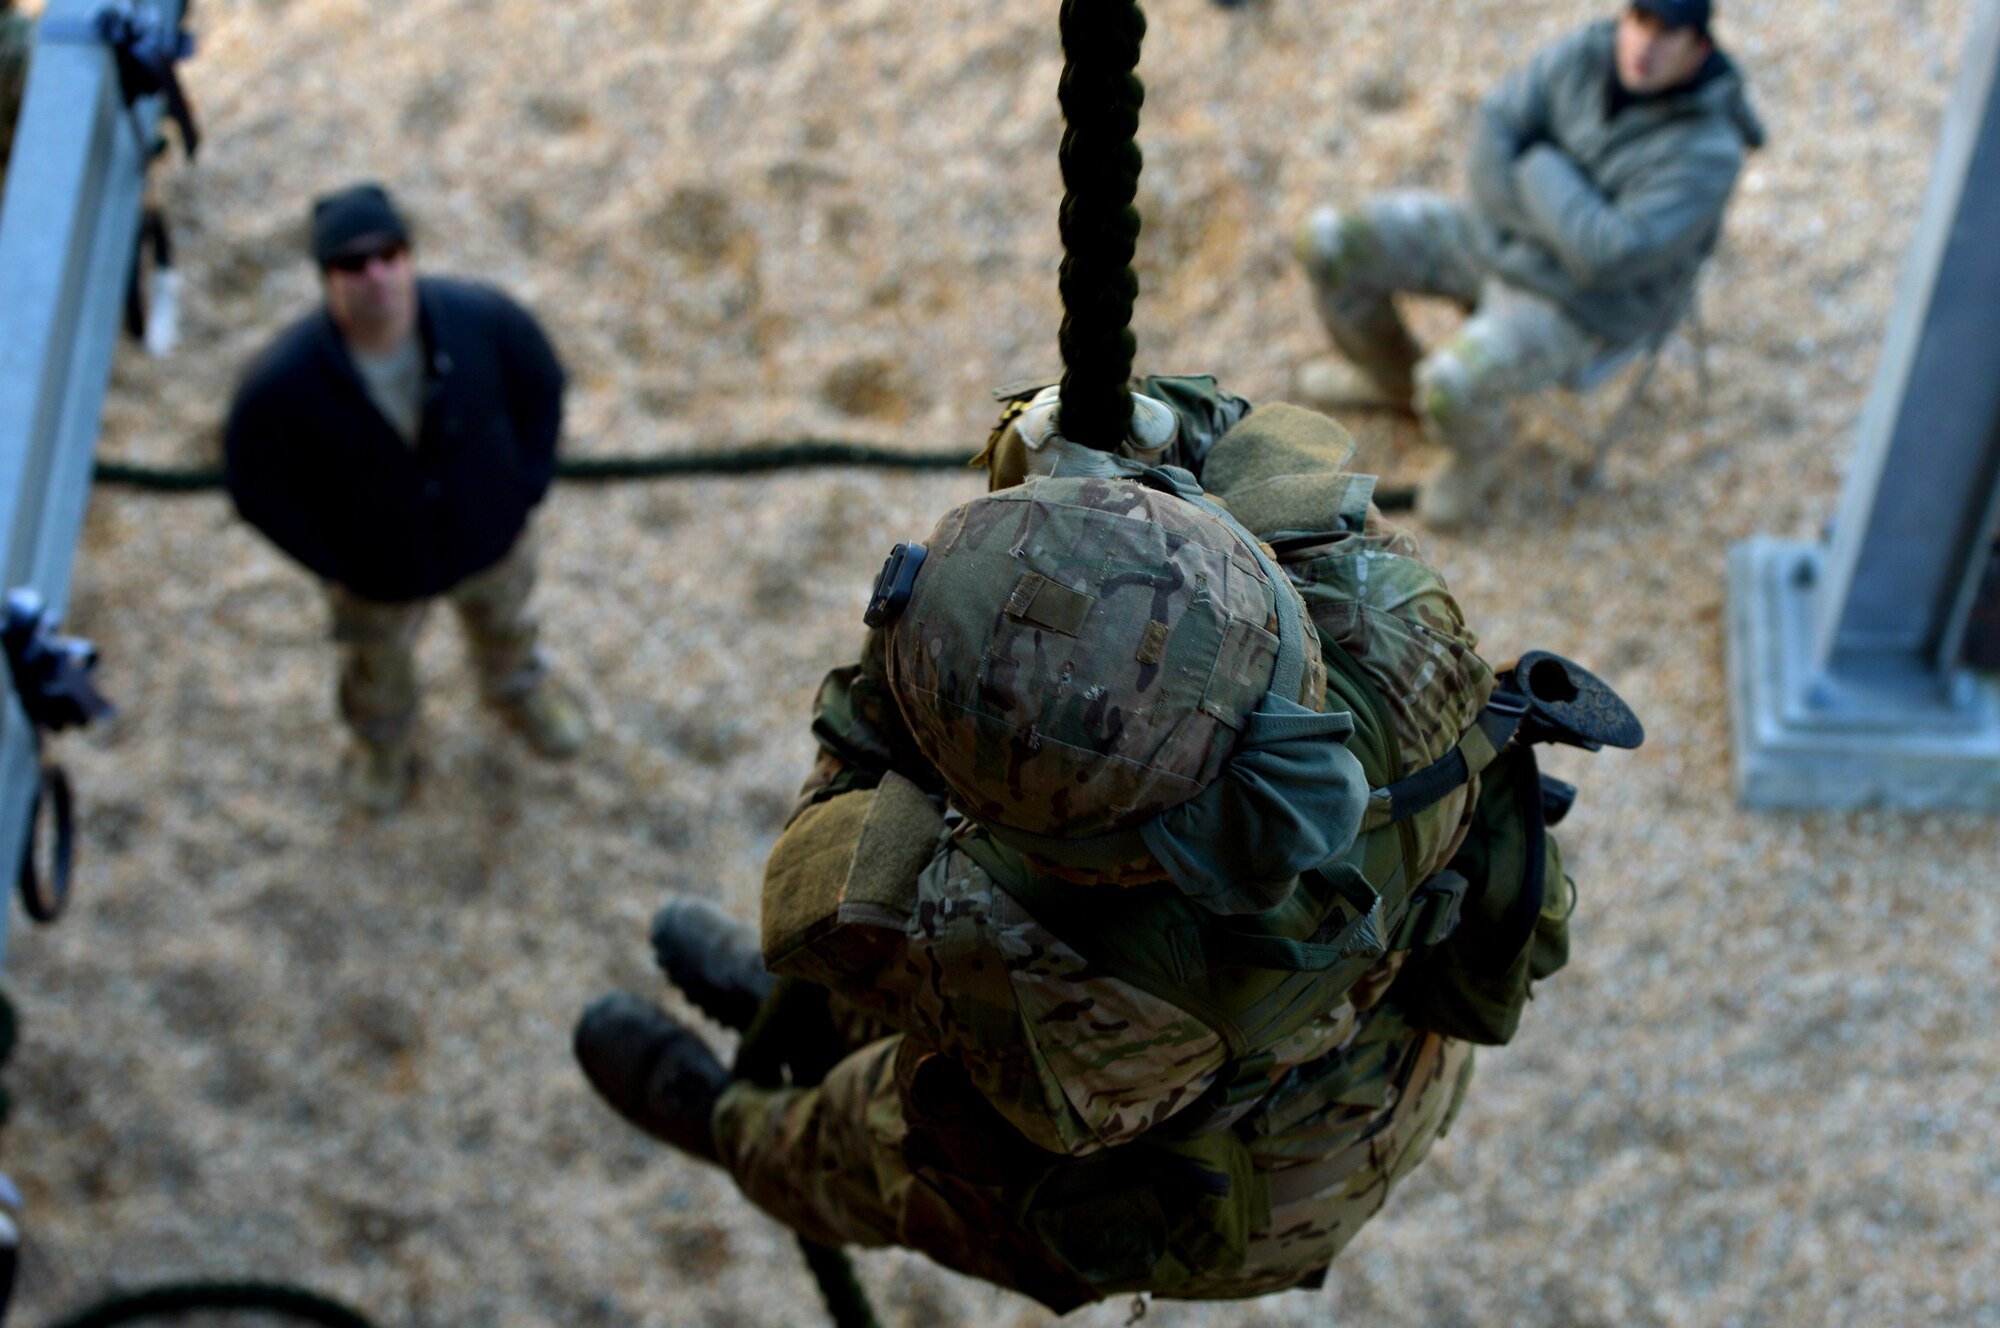 A U.S. Air Force Combat Control trainee assigned to Operating Location C, 342nd Training Squadron, is evaluated by two CCT instructors while fast-roping from a training tower, Feb. 13, 2015 at Pope Army Airfield, North Carolina. Students have to complete several phases of fast-rope training while being heavily evaluated before fast-roping from helicopters and other aircraft. Fast-roping allows Airmen and other military members to respond to crises as a quick reaction force, conduct missions requiring stealth tactics and board vessels while at sea. (U.S. Air Force photo by Staff Sgt. Kenny Holston)